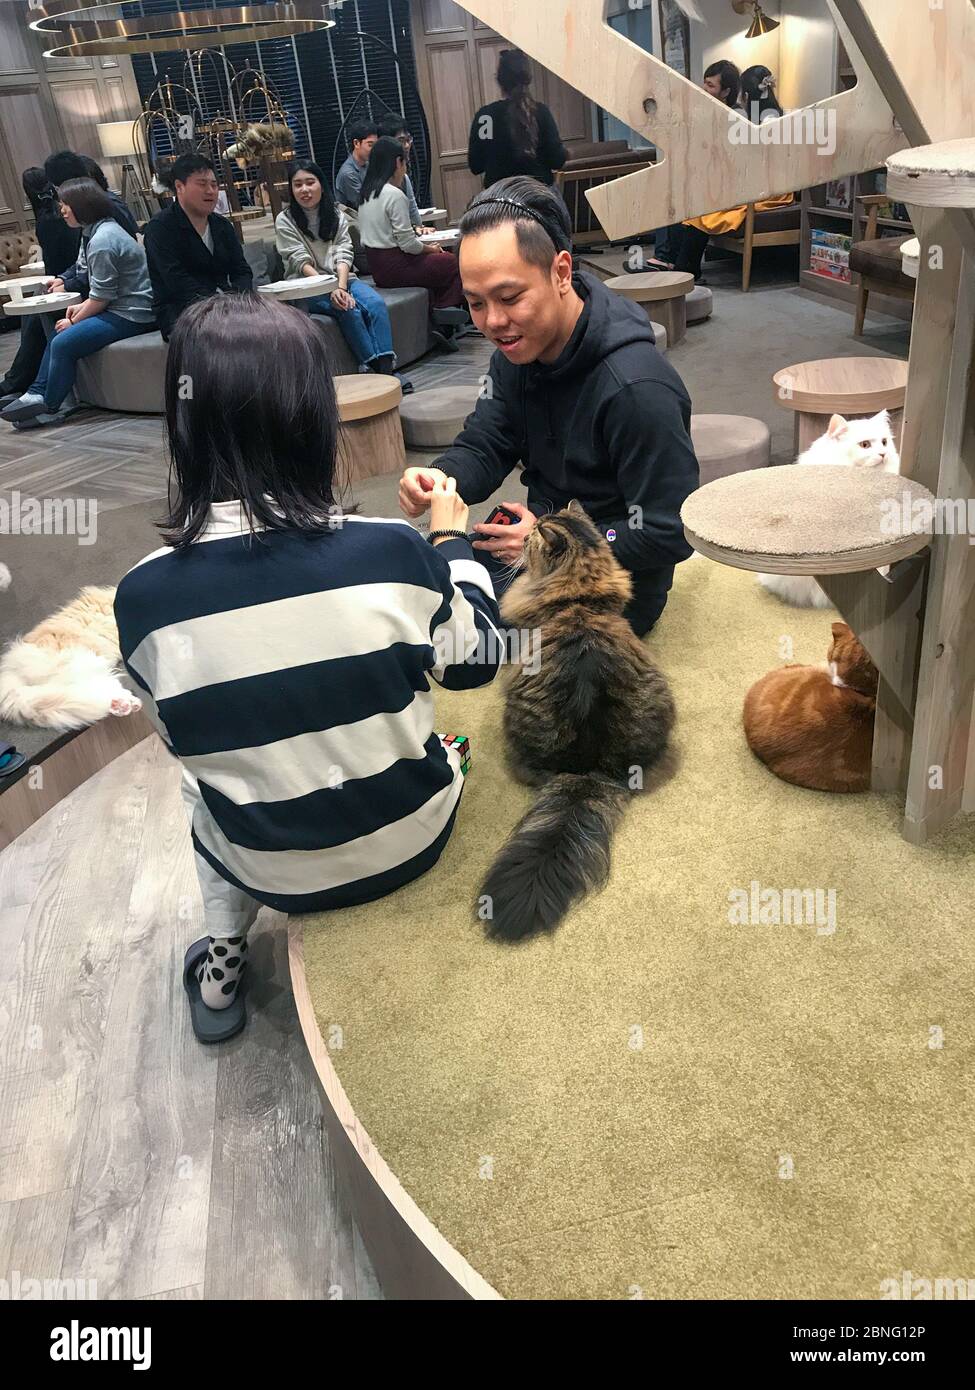 Cute angry cat haha - didn't move from top shelf - can't touch cats up  there – Foto de Cat Cafe Hapineko, Shibuya - Tripadvisor